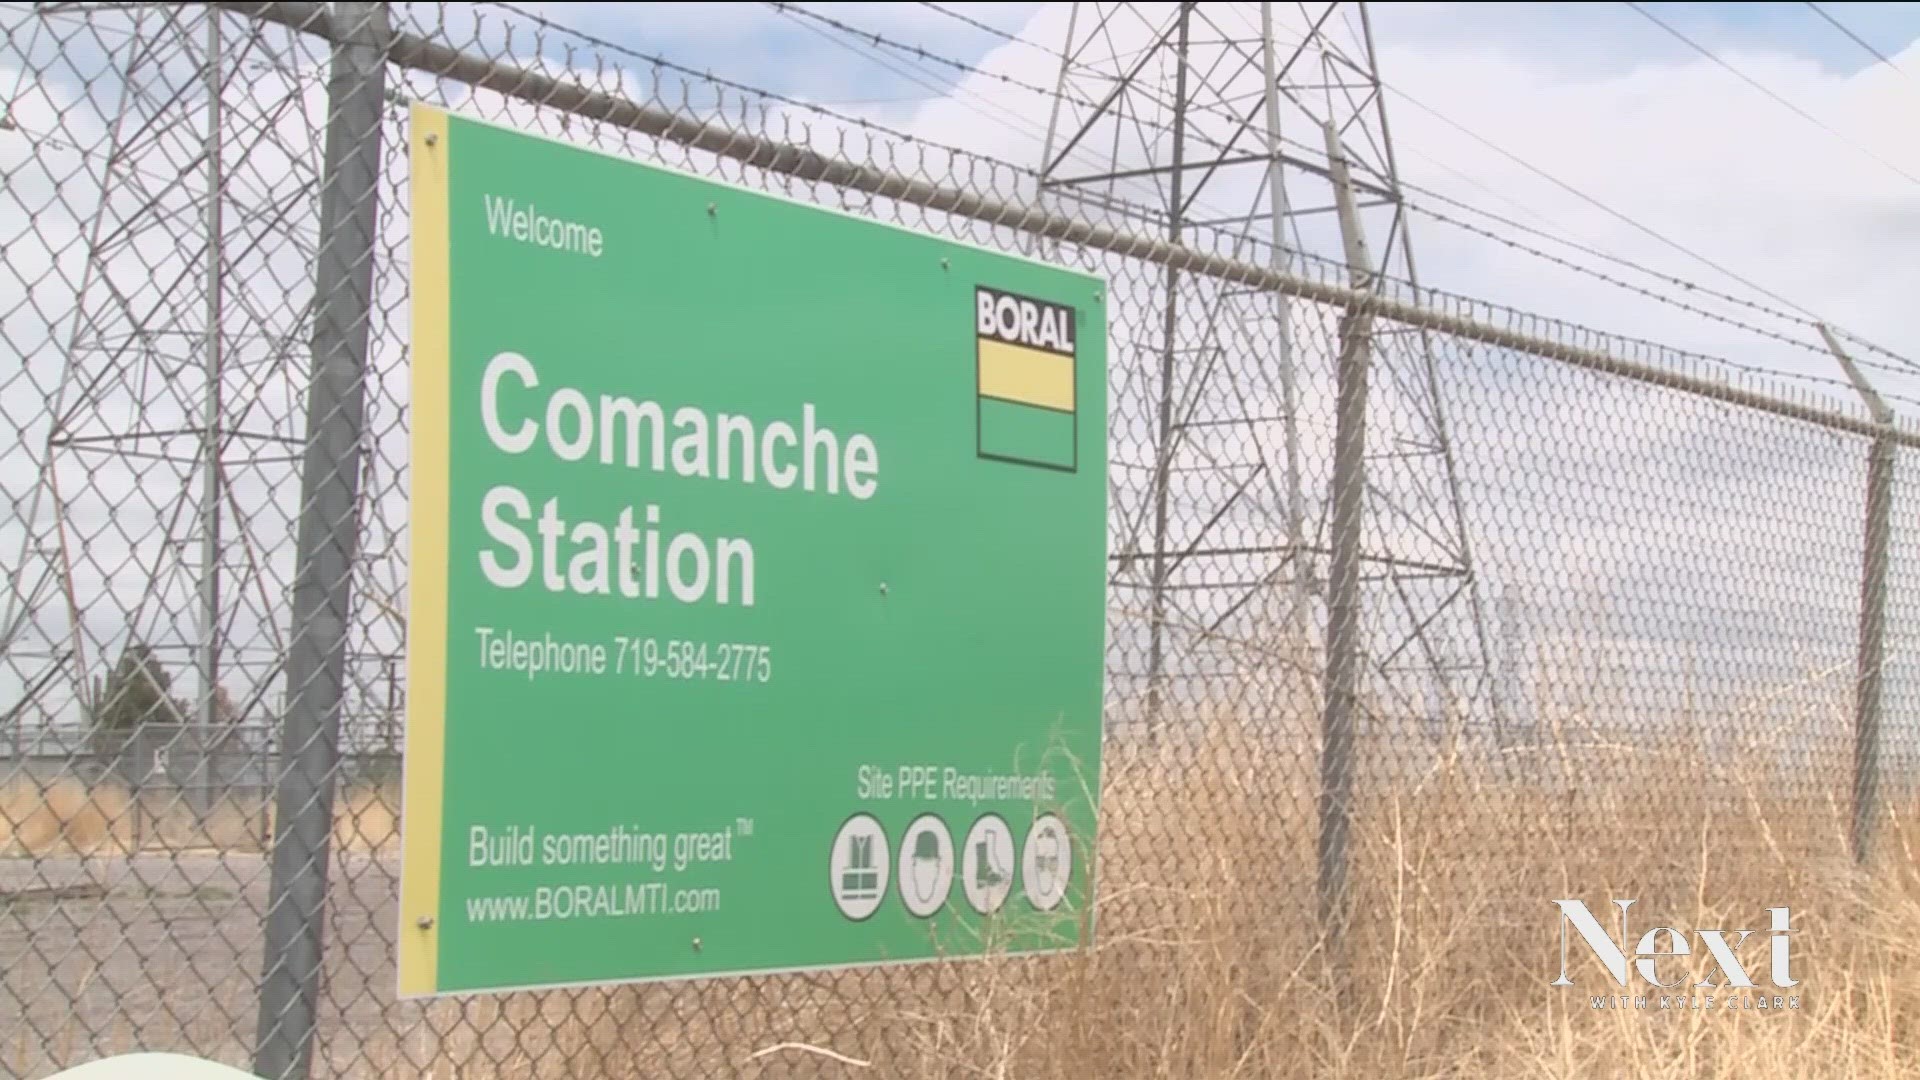 CORE Electric Cooperative is suing over alleged mismanagement of the Comanche coal-powered plant in Pueblo. CORE also takes issue with retiring the plant in 2031.